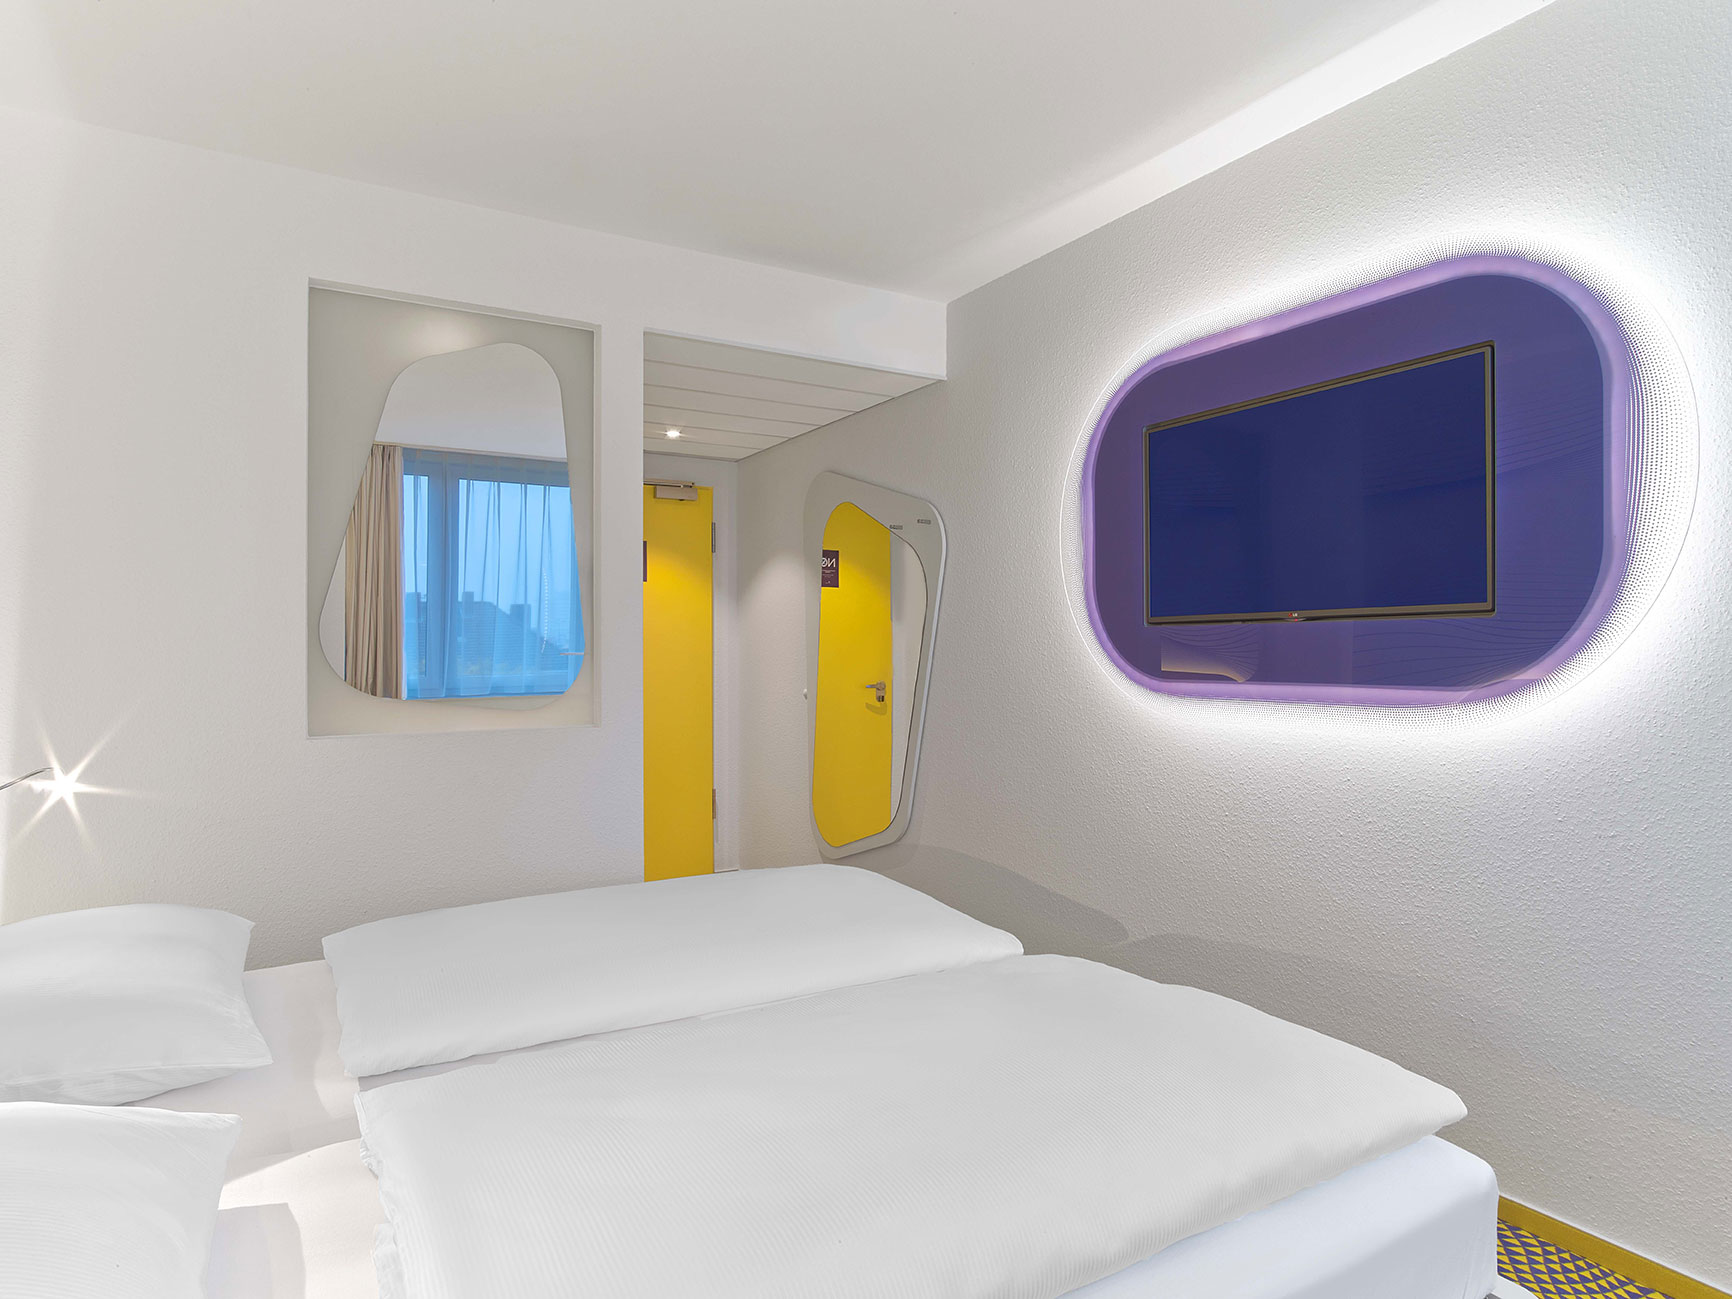 Hotel room with a double bed, a yellow door and a purple TV sideboard